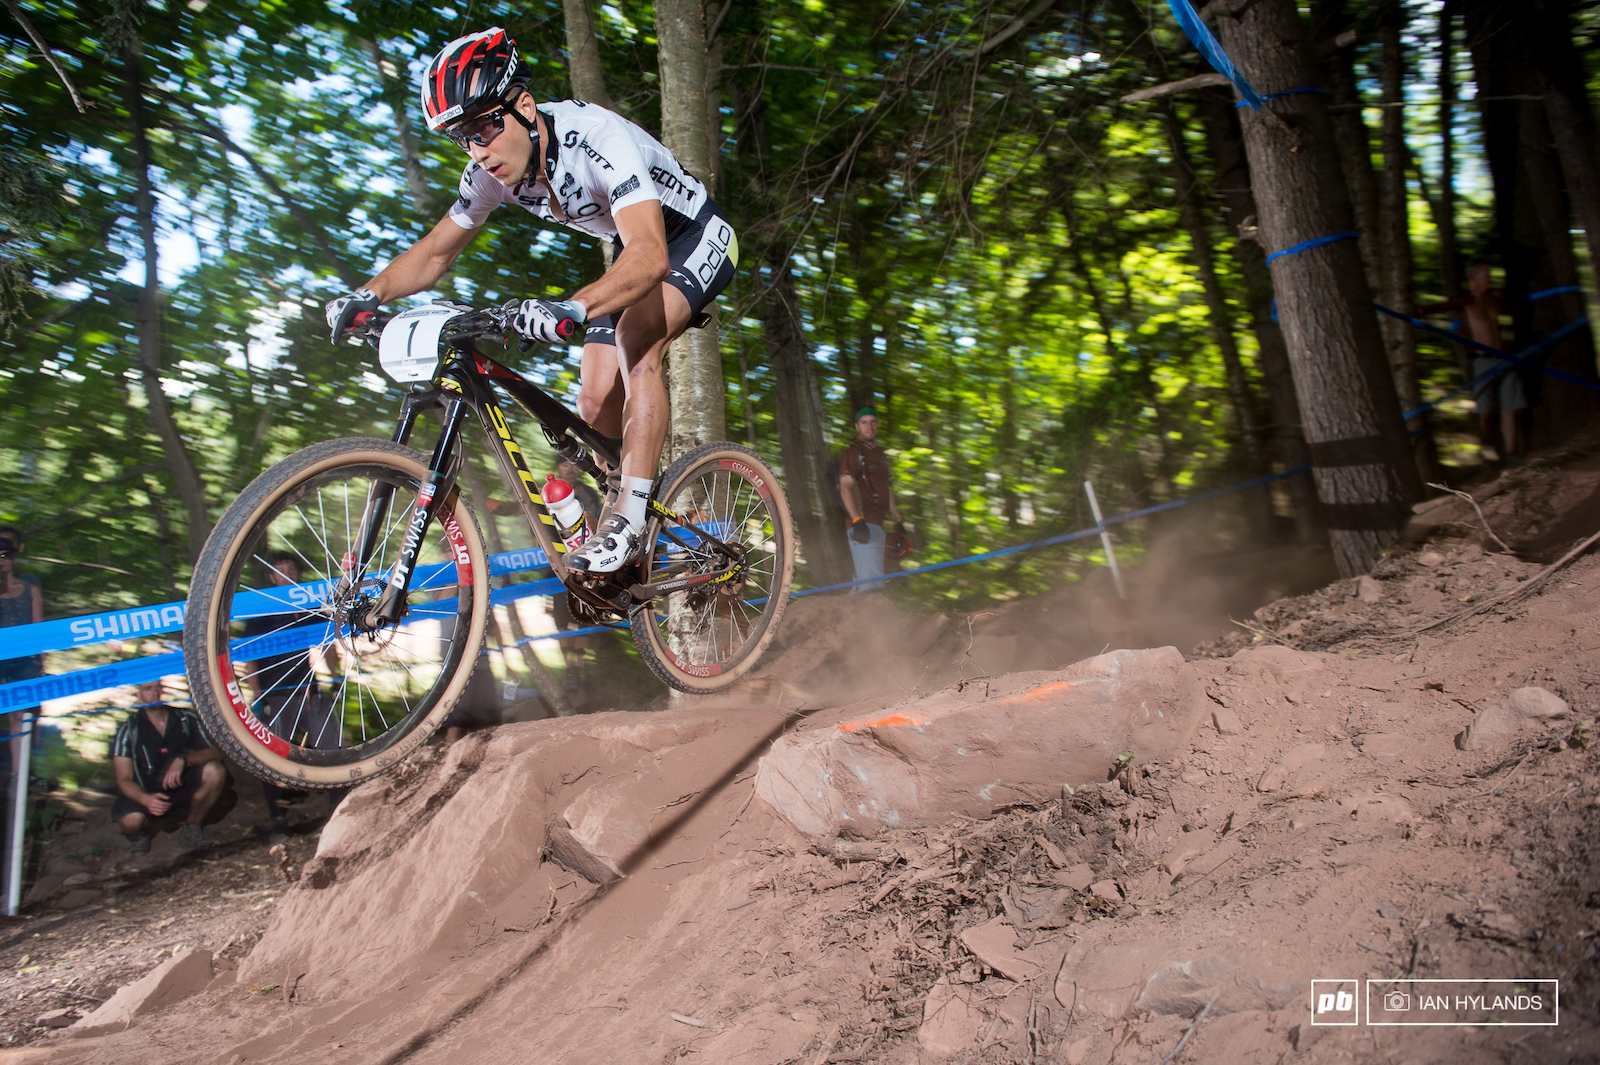 Avancini aside Nino Schurter took the lead on the first lap and was never out of the top 3 for the rest of the race.